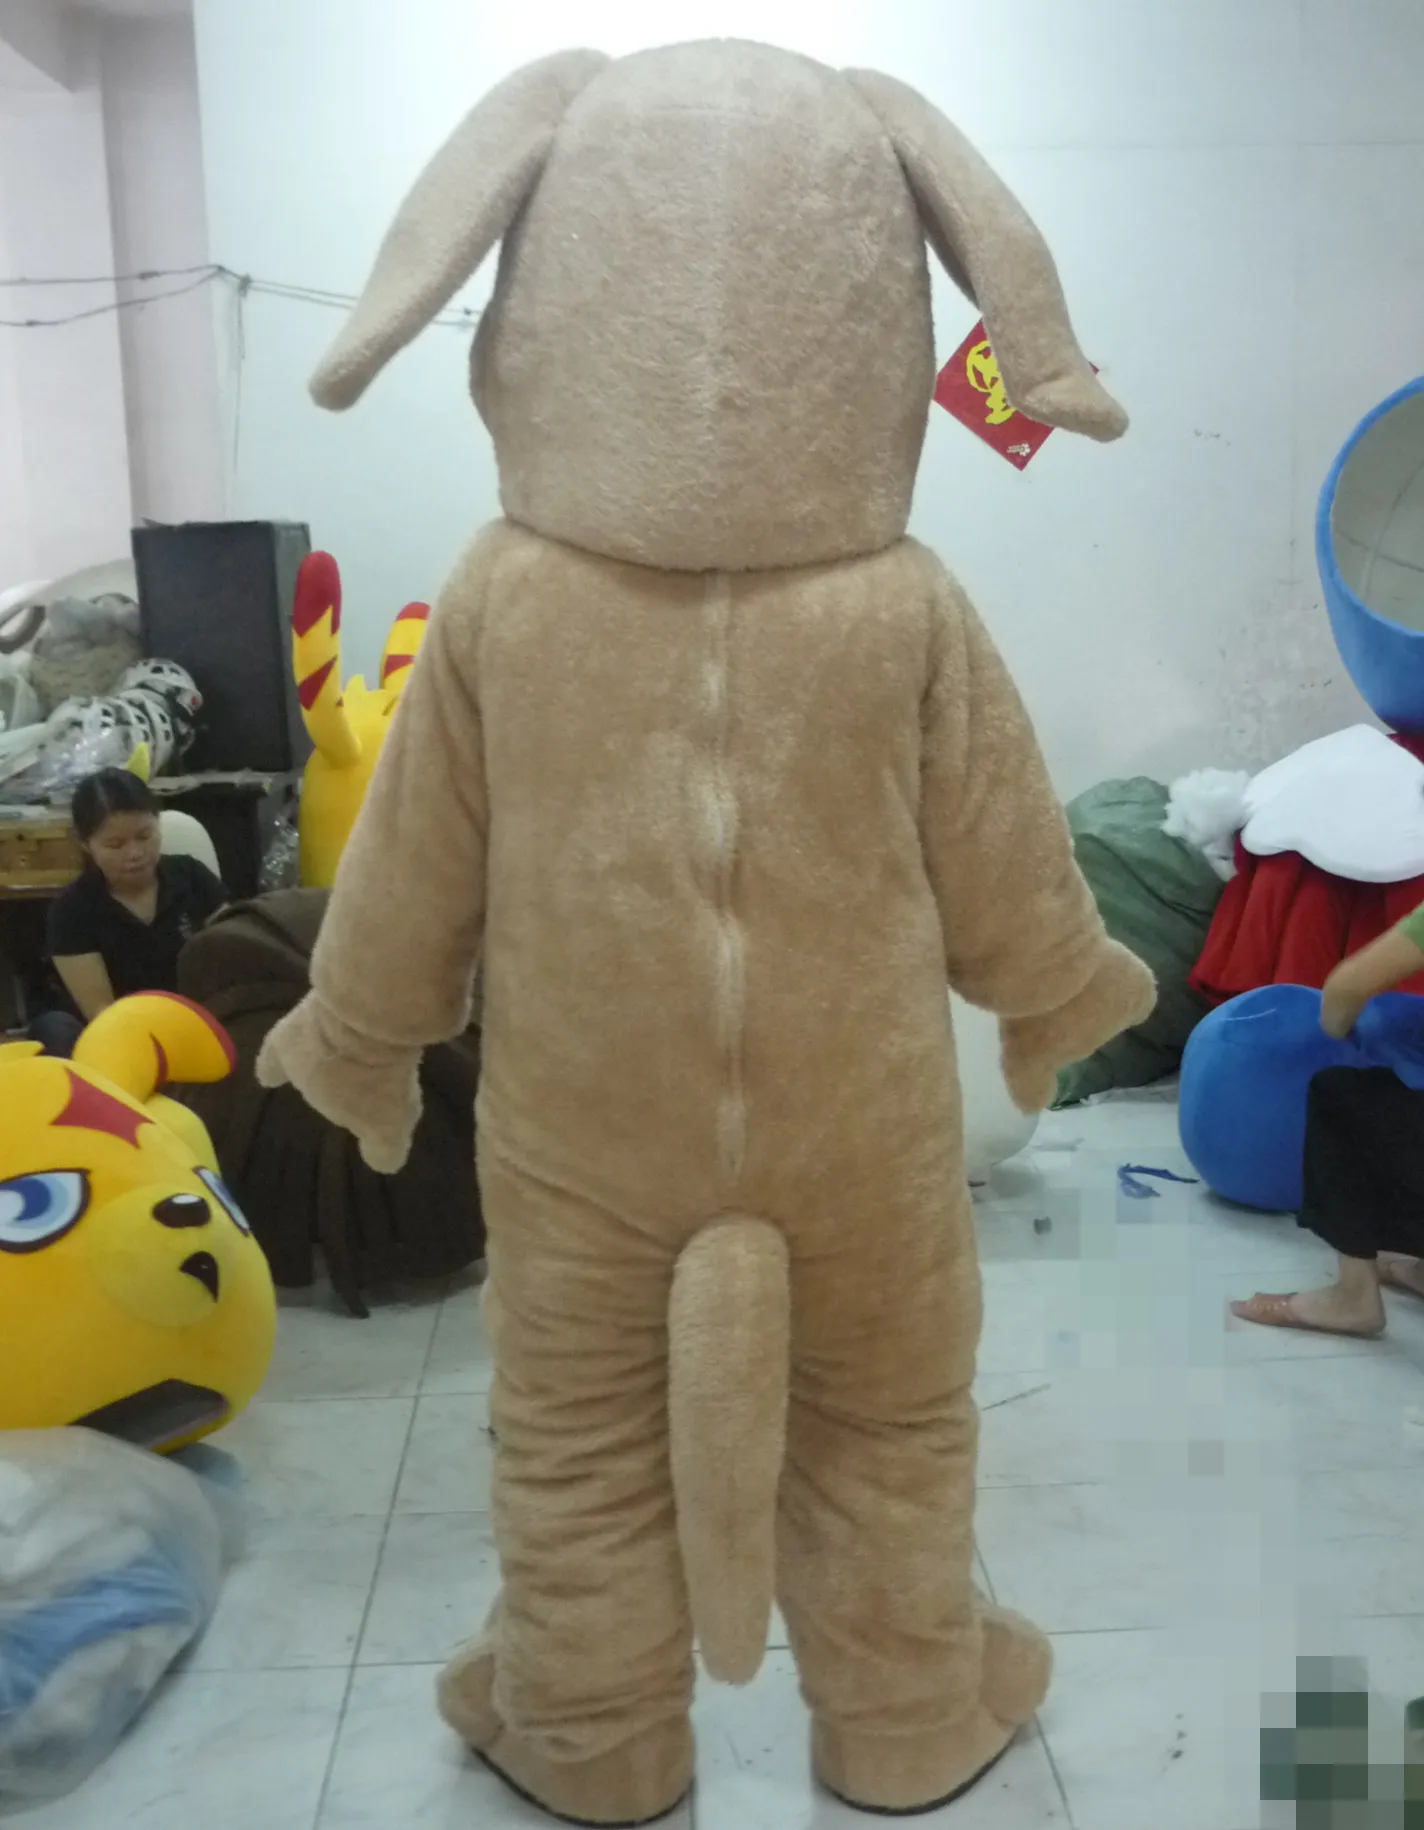 Details about   Dog Mascot Costume Cosplay Party Game Dress Outfit Advertising Halloween Adult 